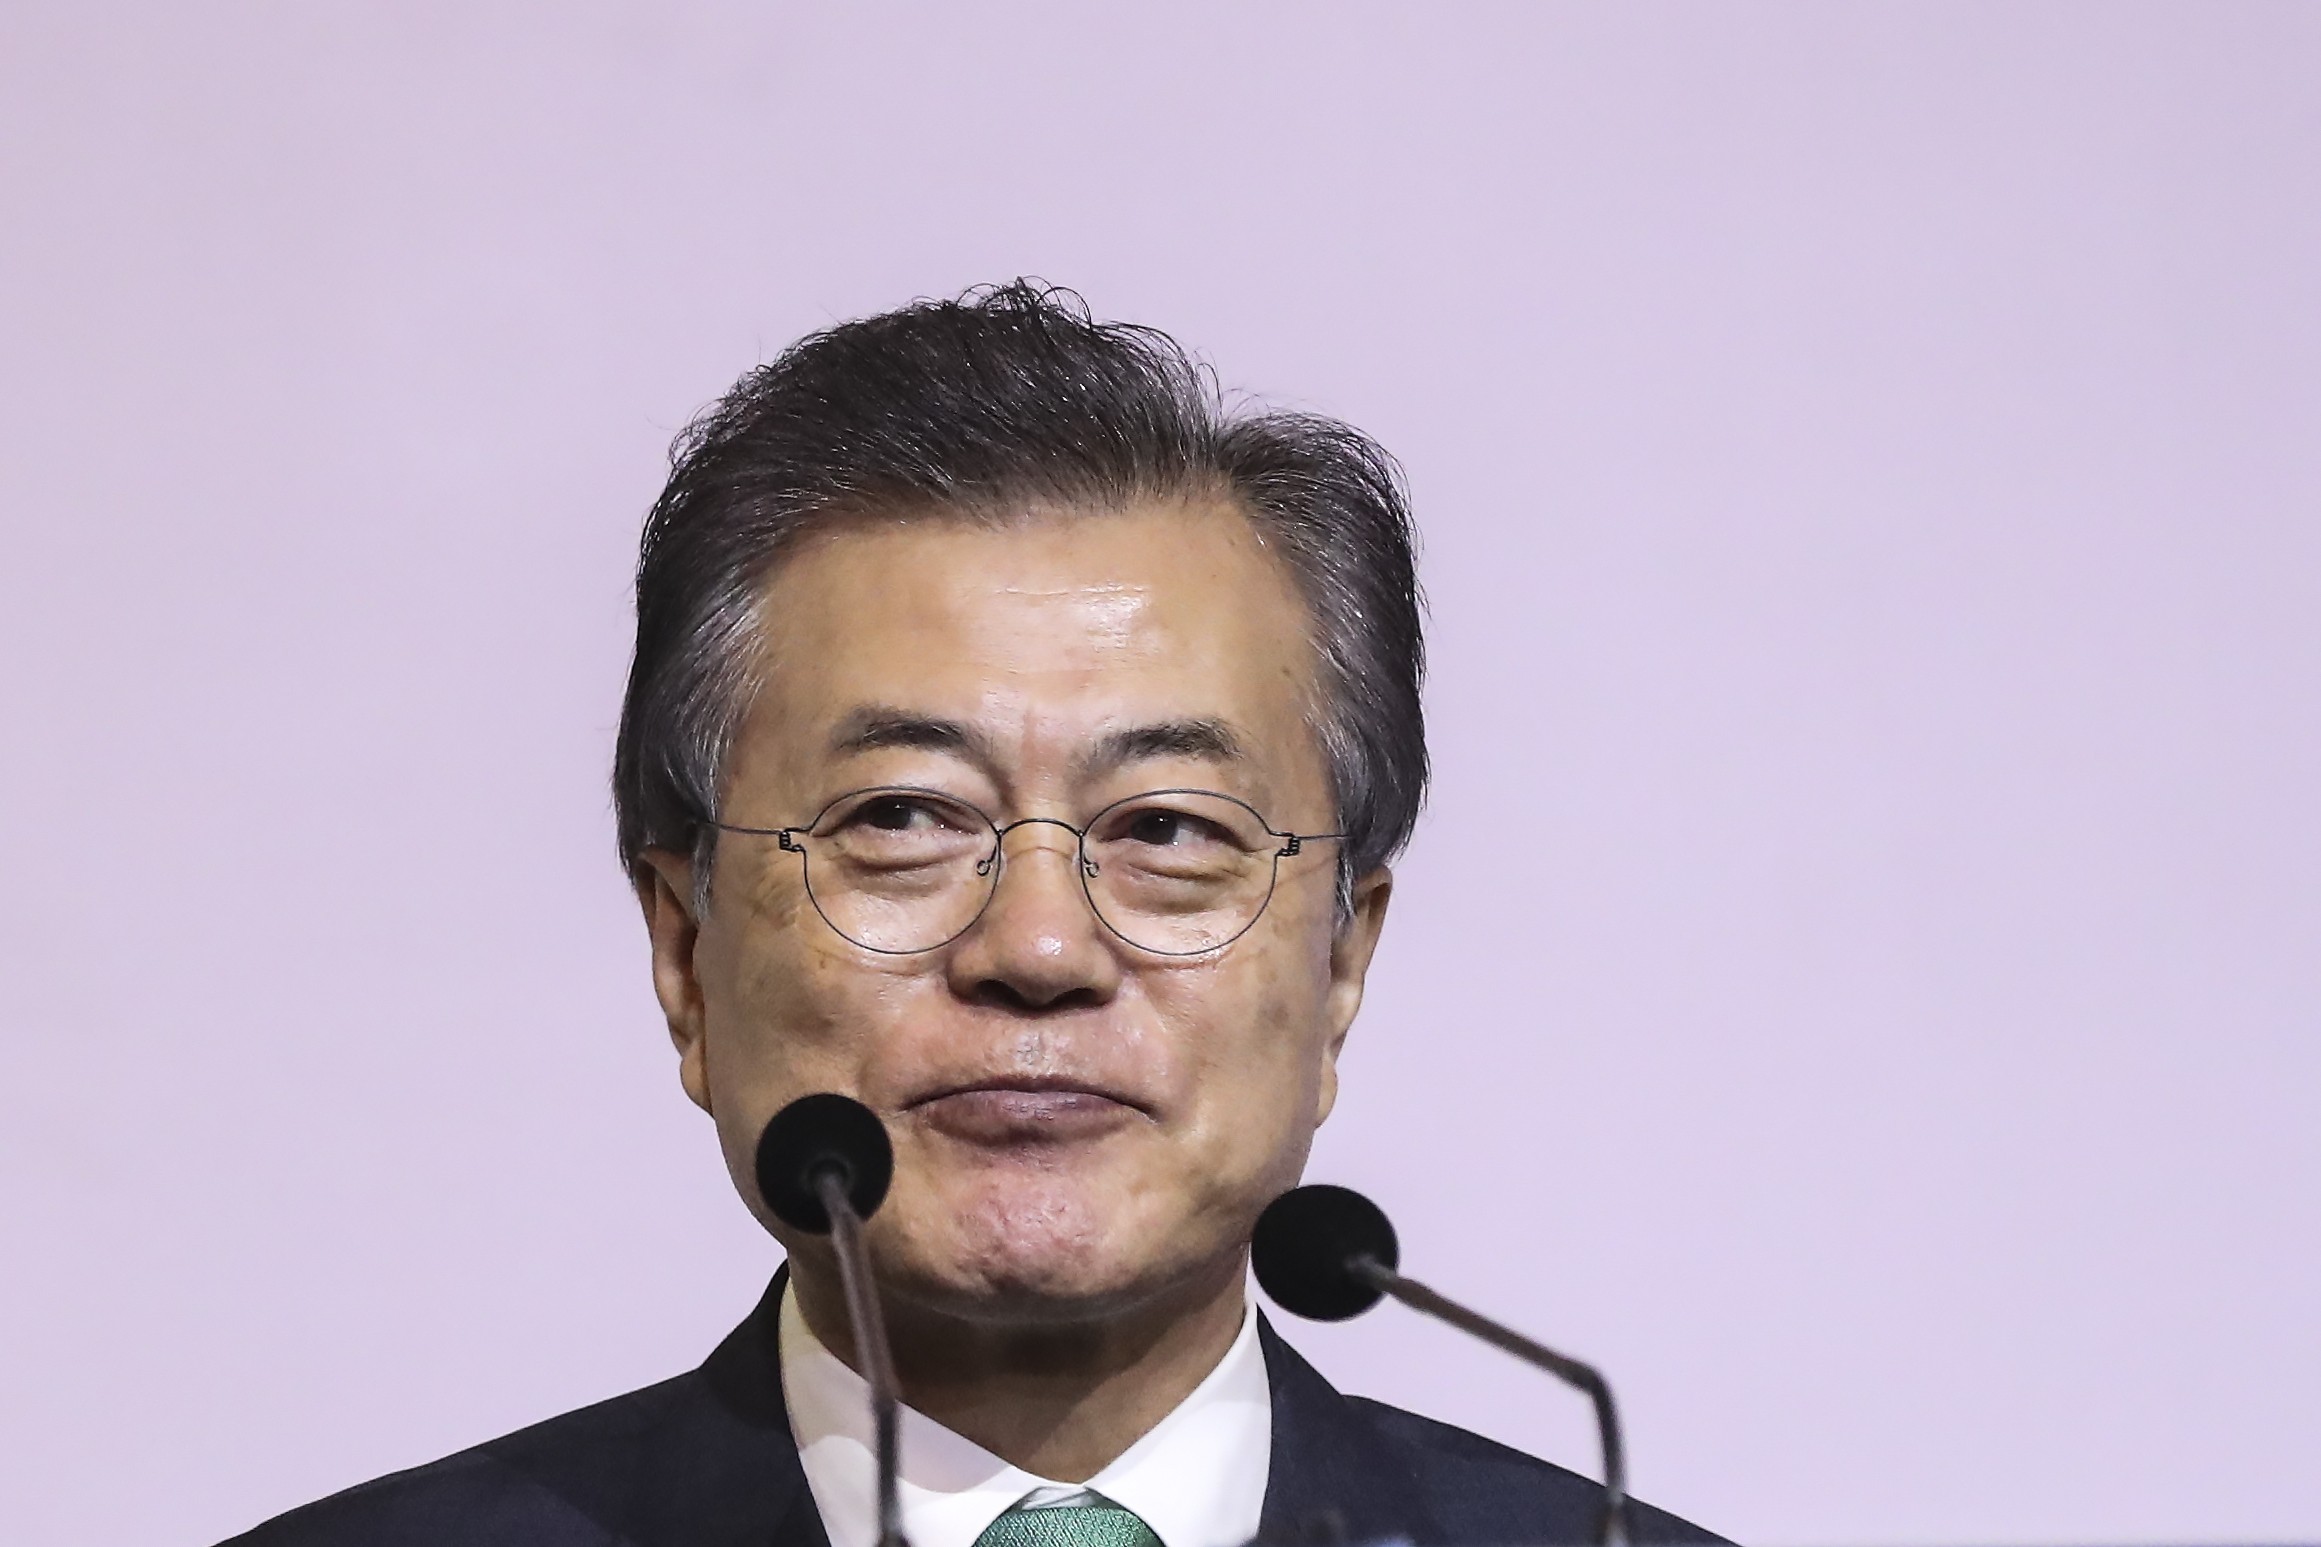 Under President Moon Jae-in, South Korea is looking to elevate ties with Asean to diversify its economic relationships and reduce its reliance on China. Photo: AP